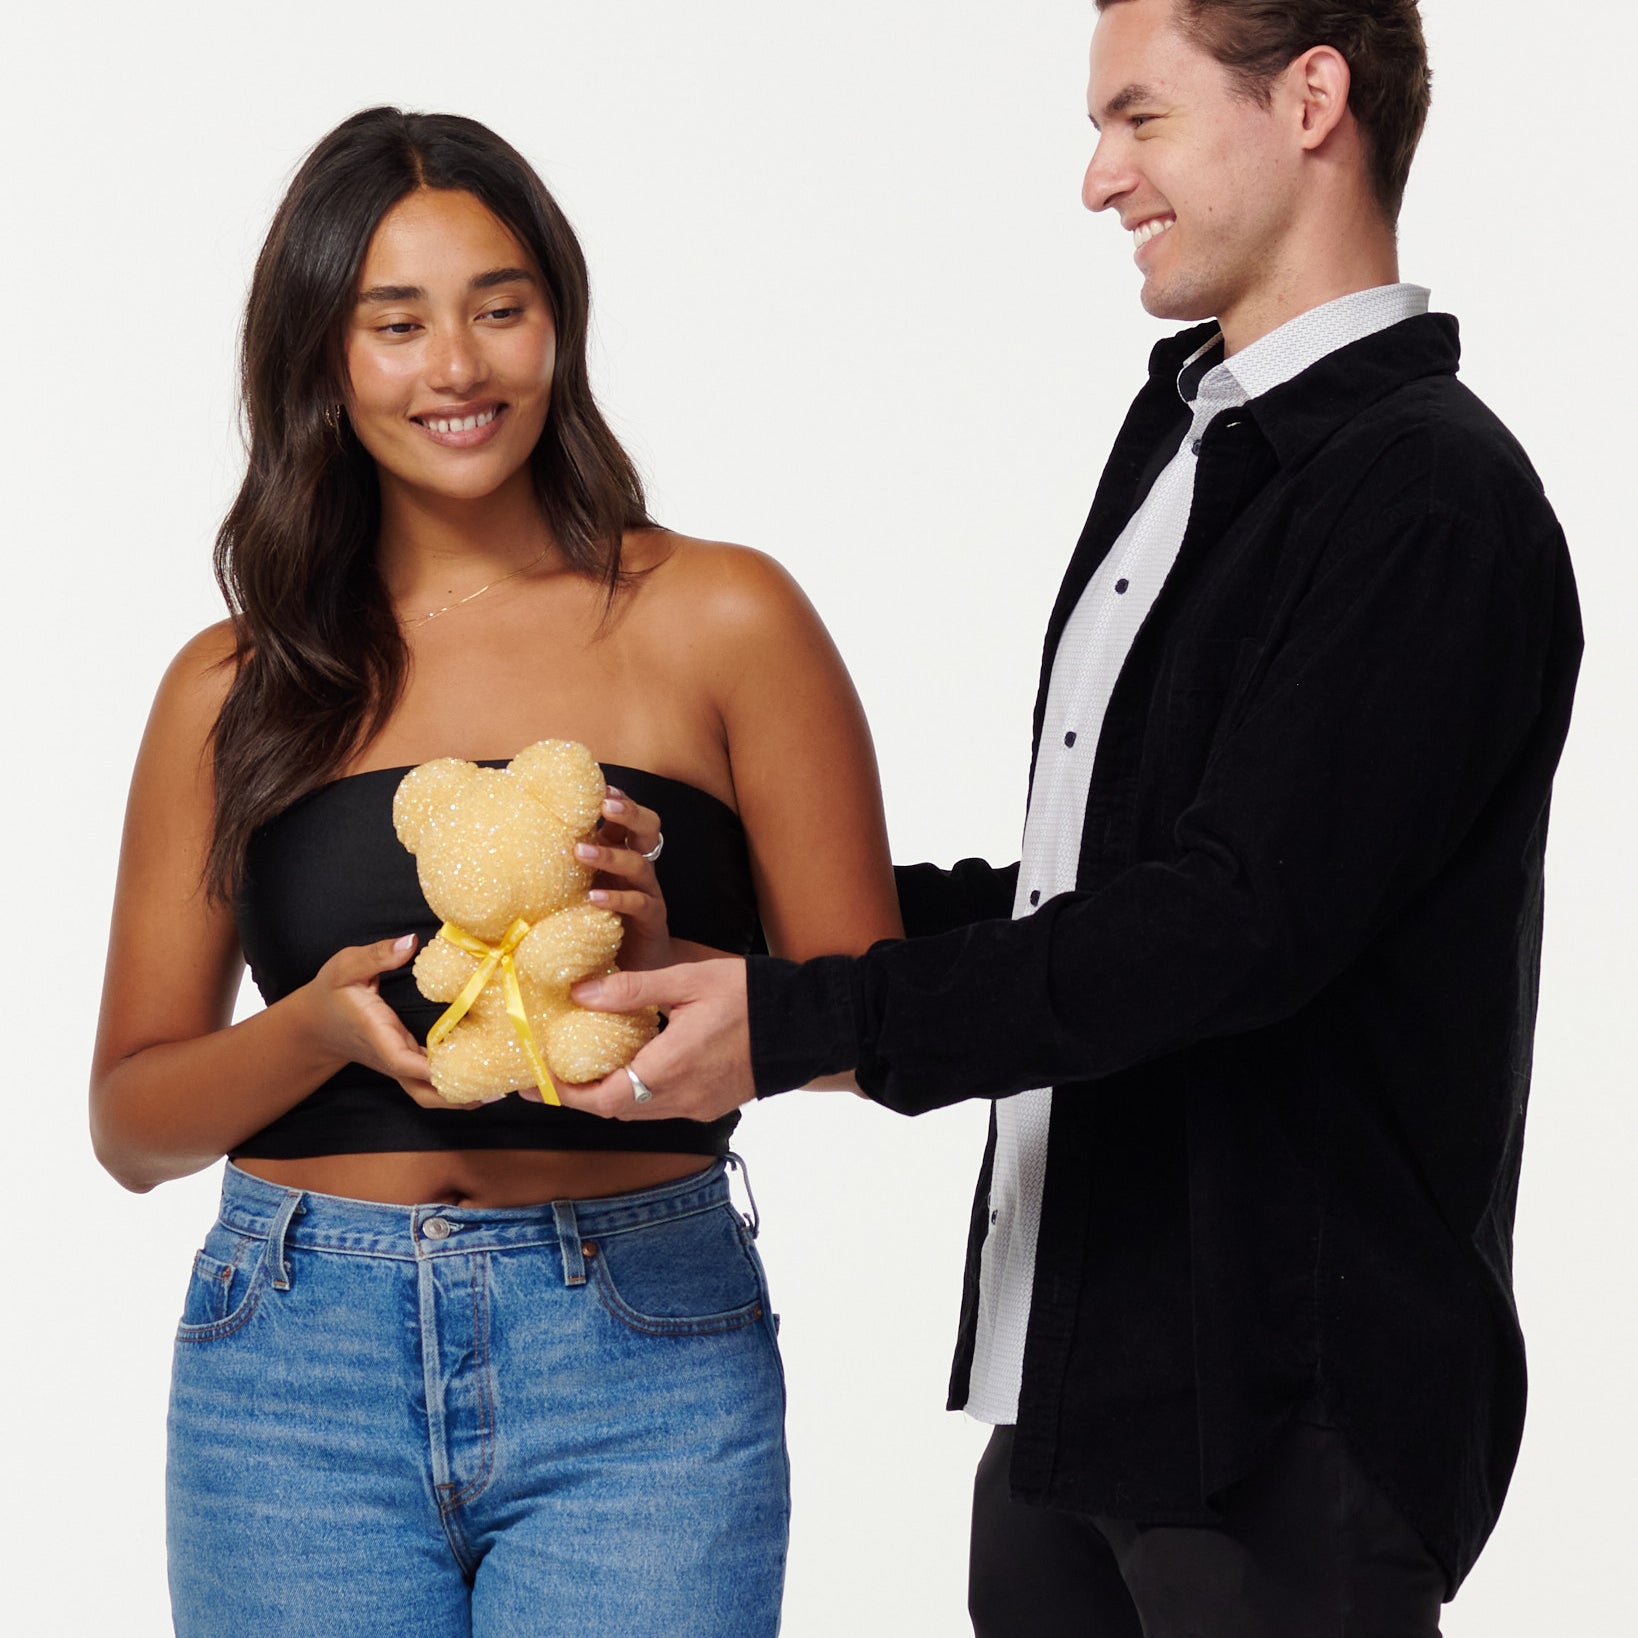 A woman and man share a moment, with the woman holding a gold-glitter bear and the man in a black jacket smiling at her. They both wear casual clothing and exude a friendly, happy demeanor.